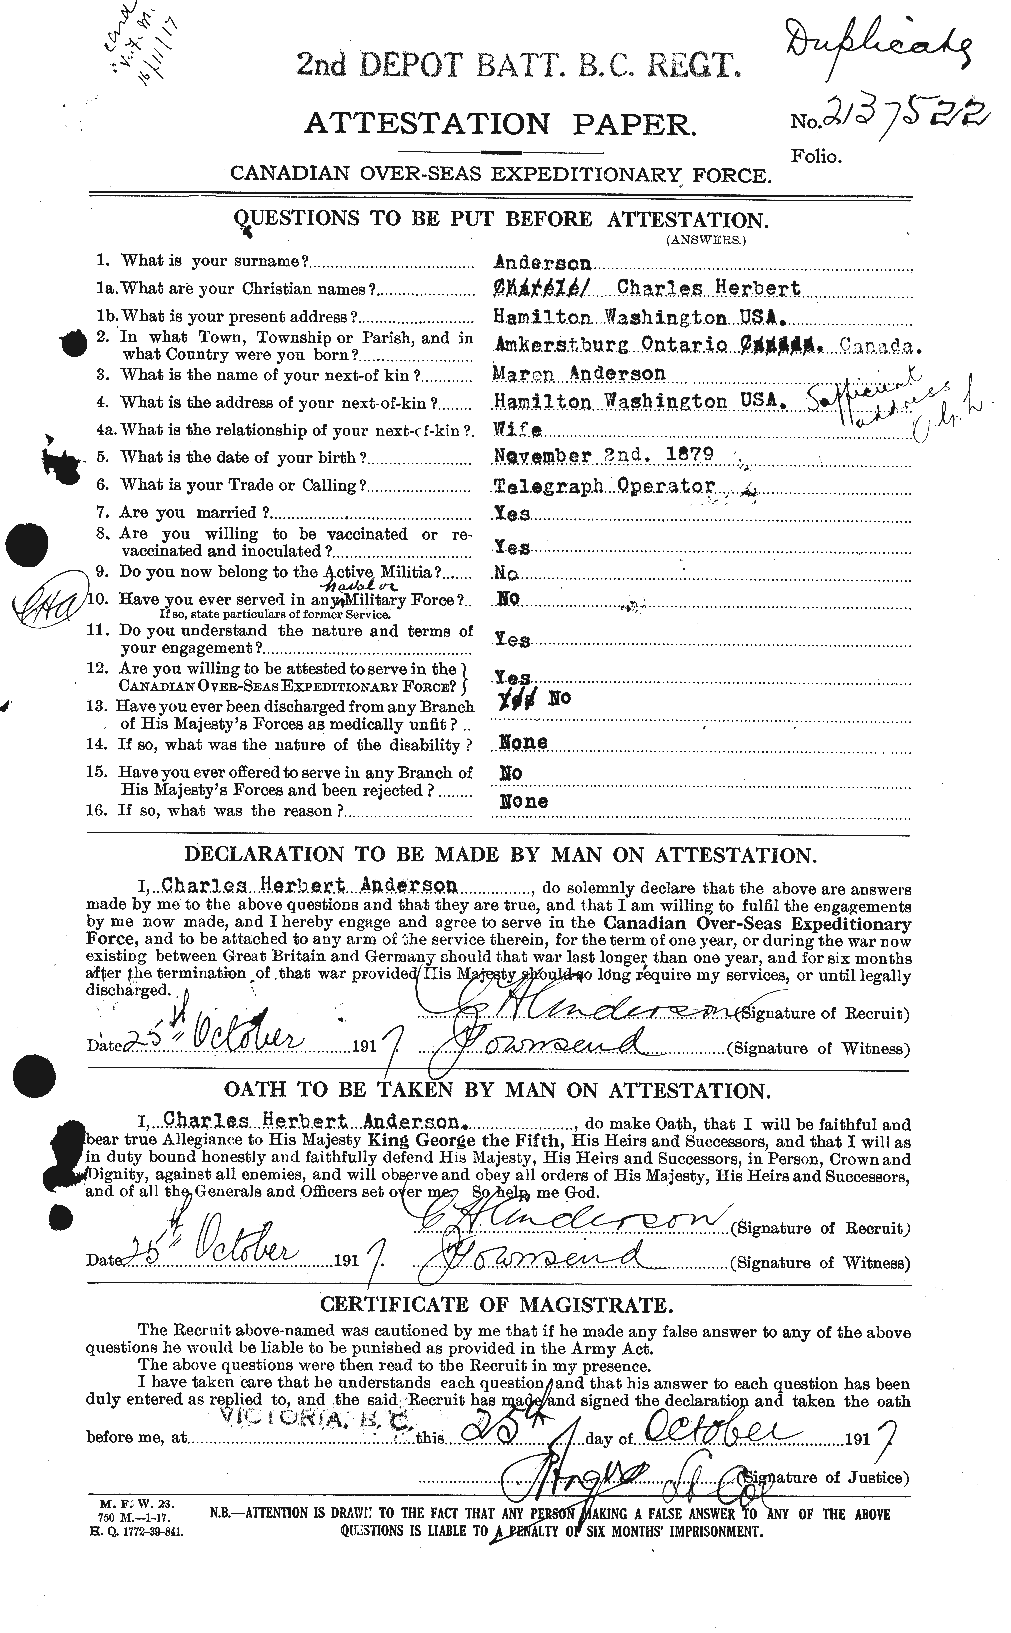 Personnel Records of the First World War - CEF 209236a